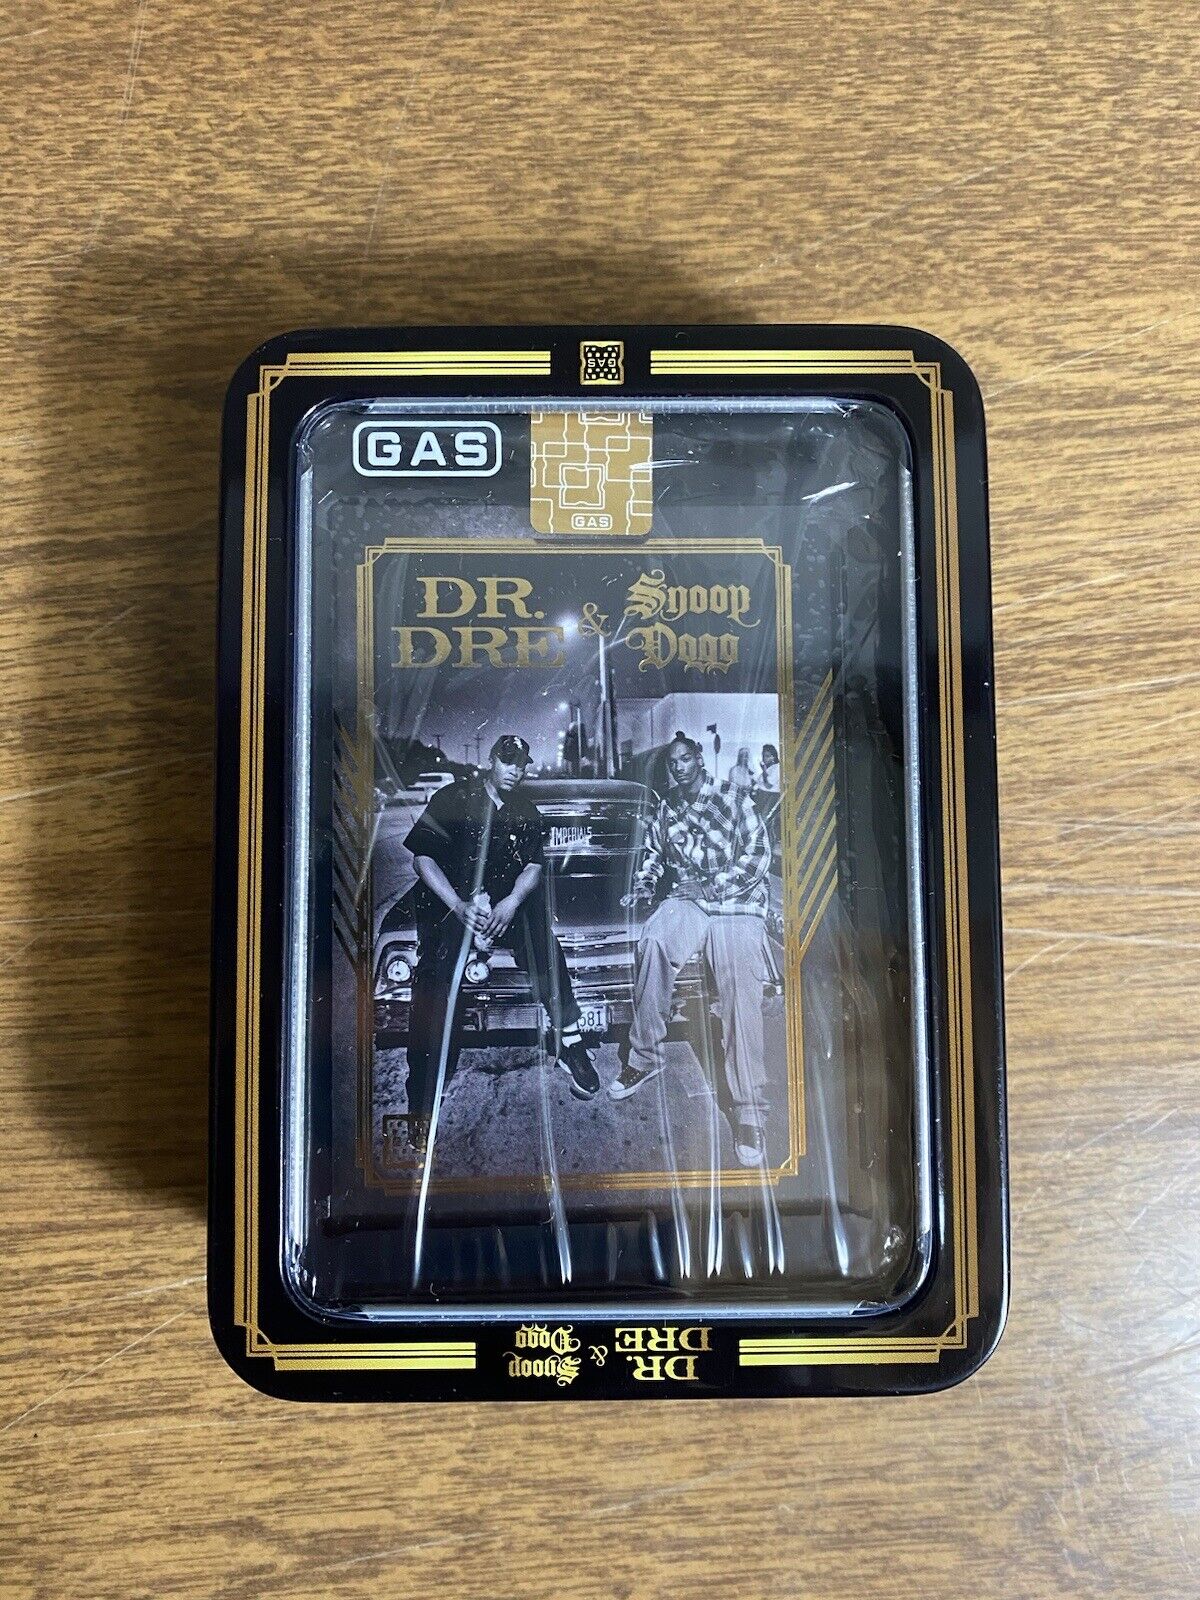 The Official Dr Dre & Snoop Dogg Deluxe GAS Trading Card Tin Box Set